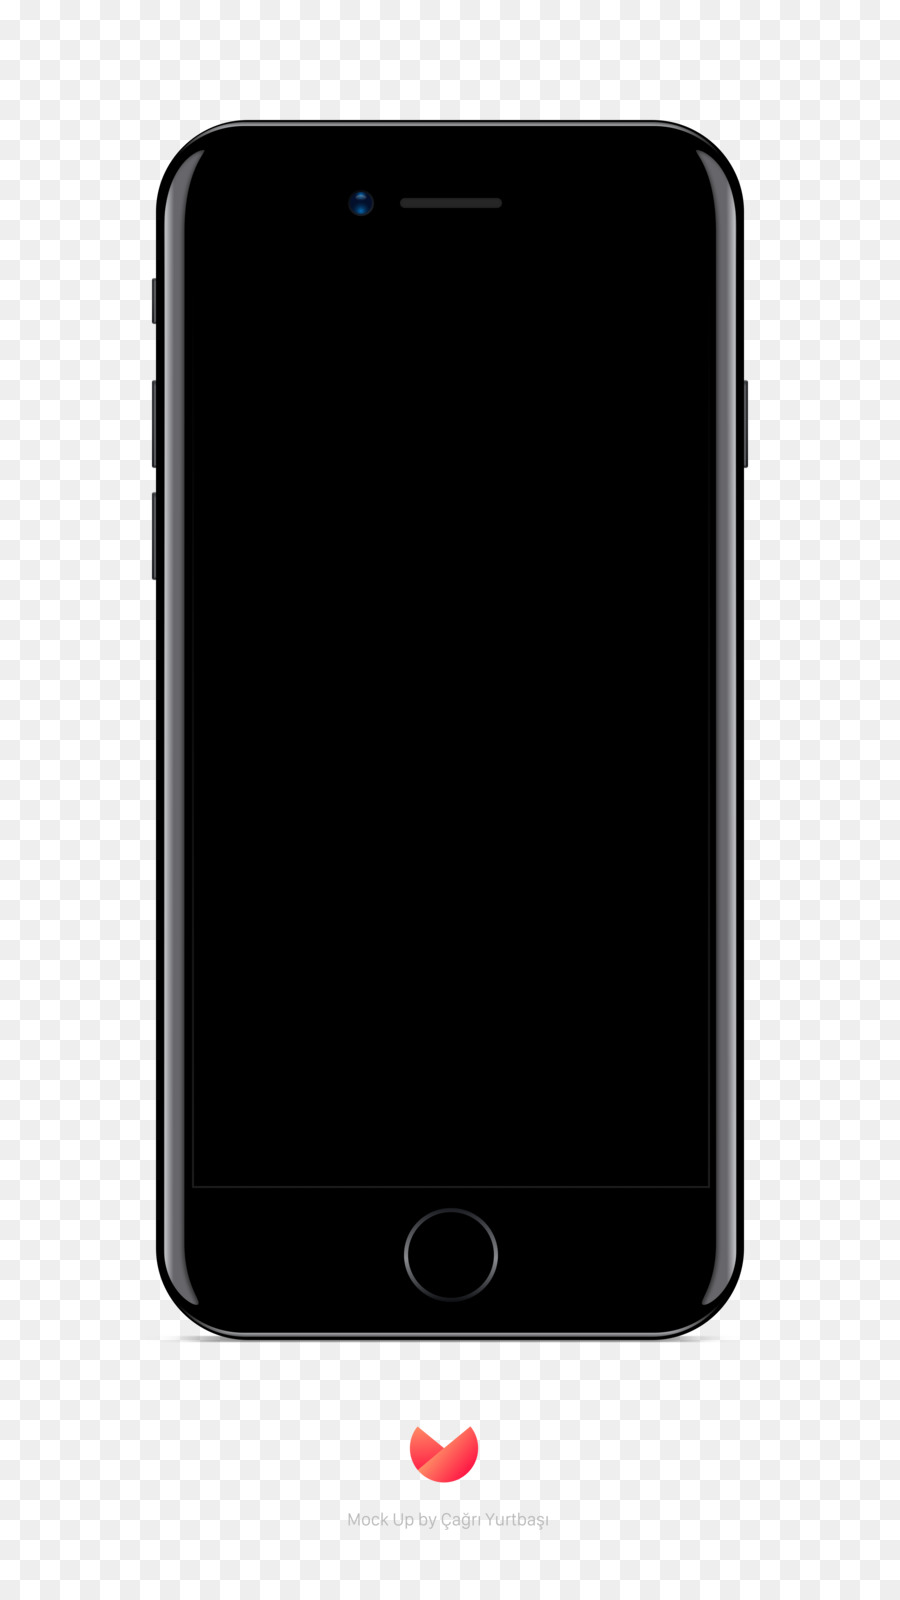 Mobile Phones Portable communications device Feature phone Handheld Devices Electronics - iphone apple png download - 4500*8000 - Free Transparent Mobile Phones png Download.